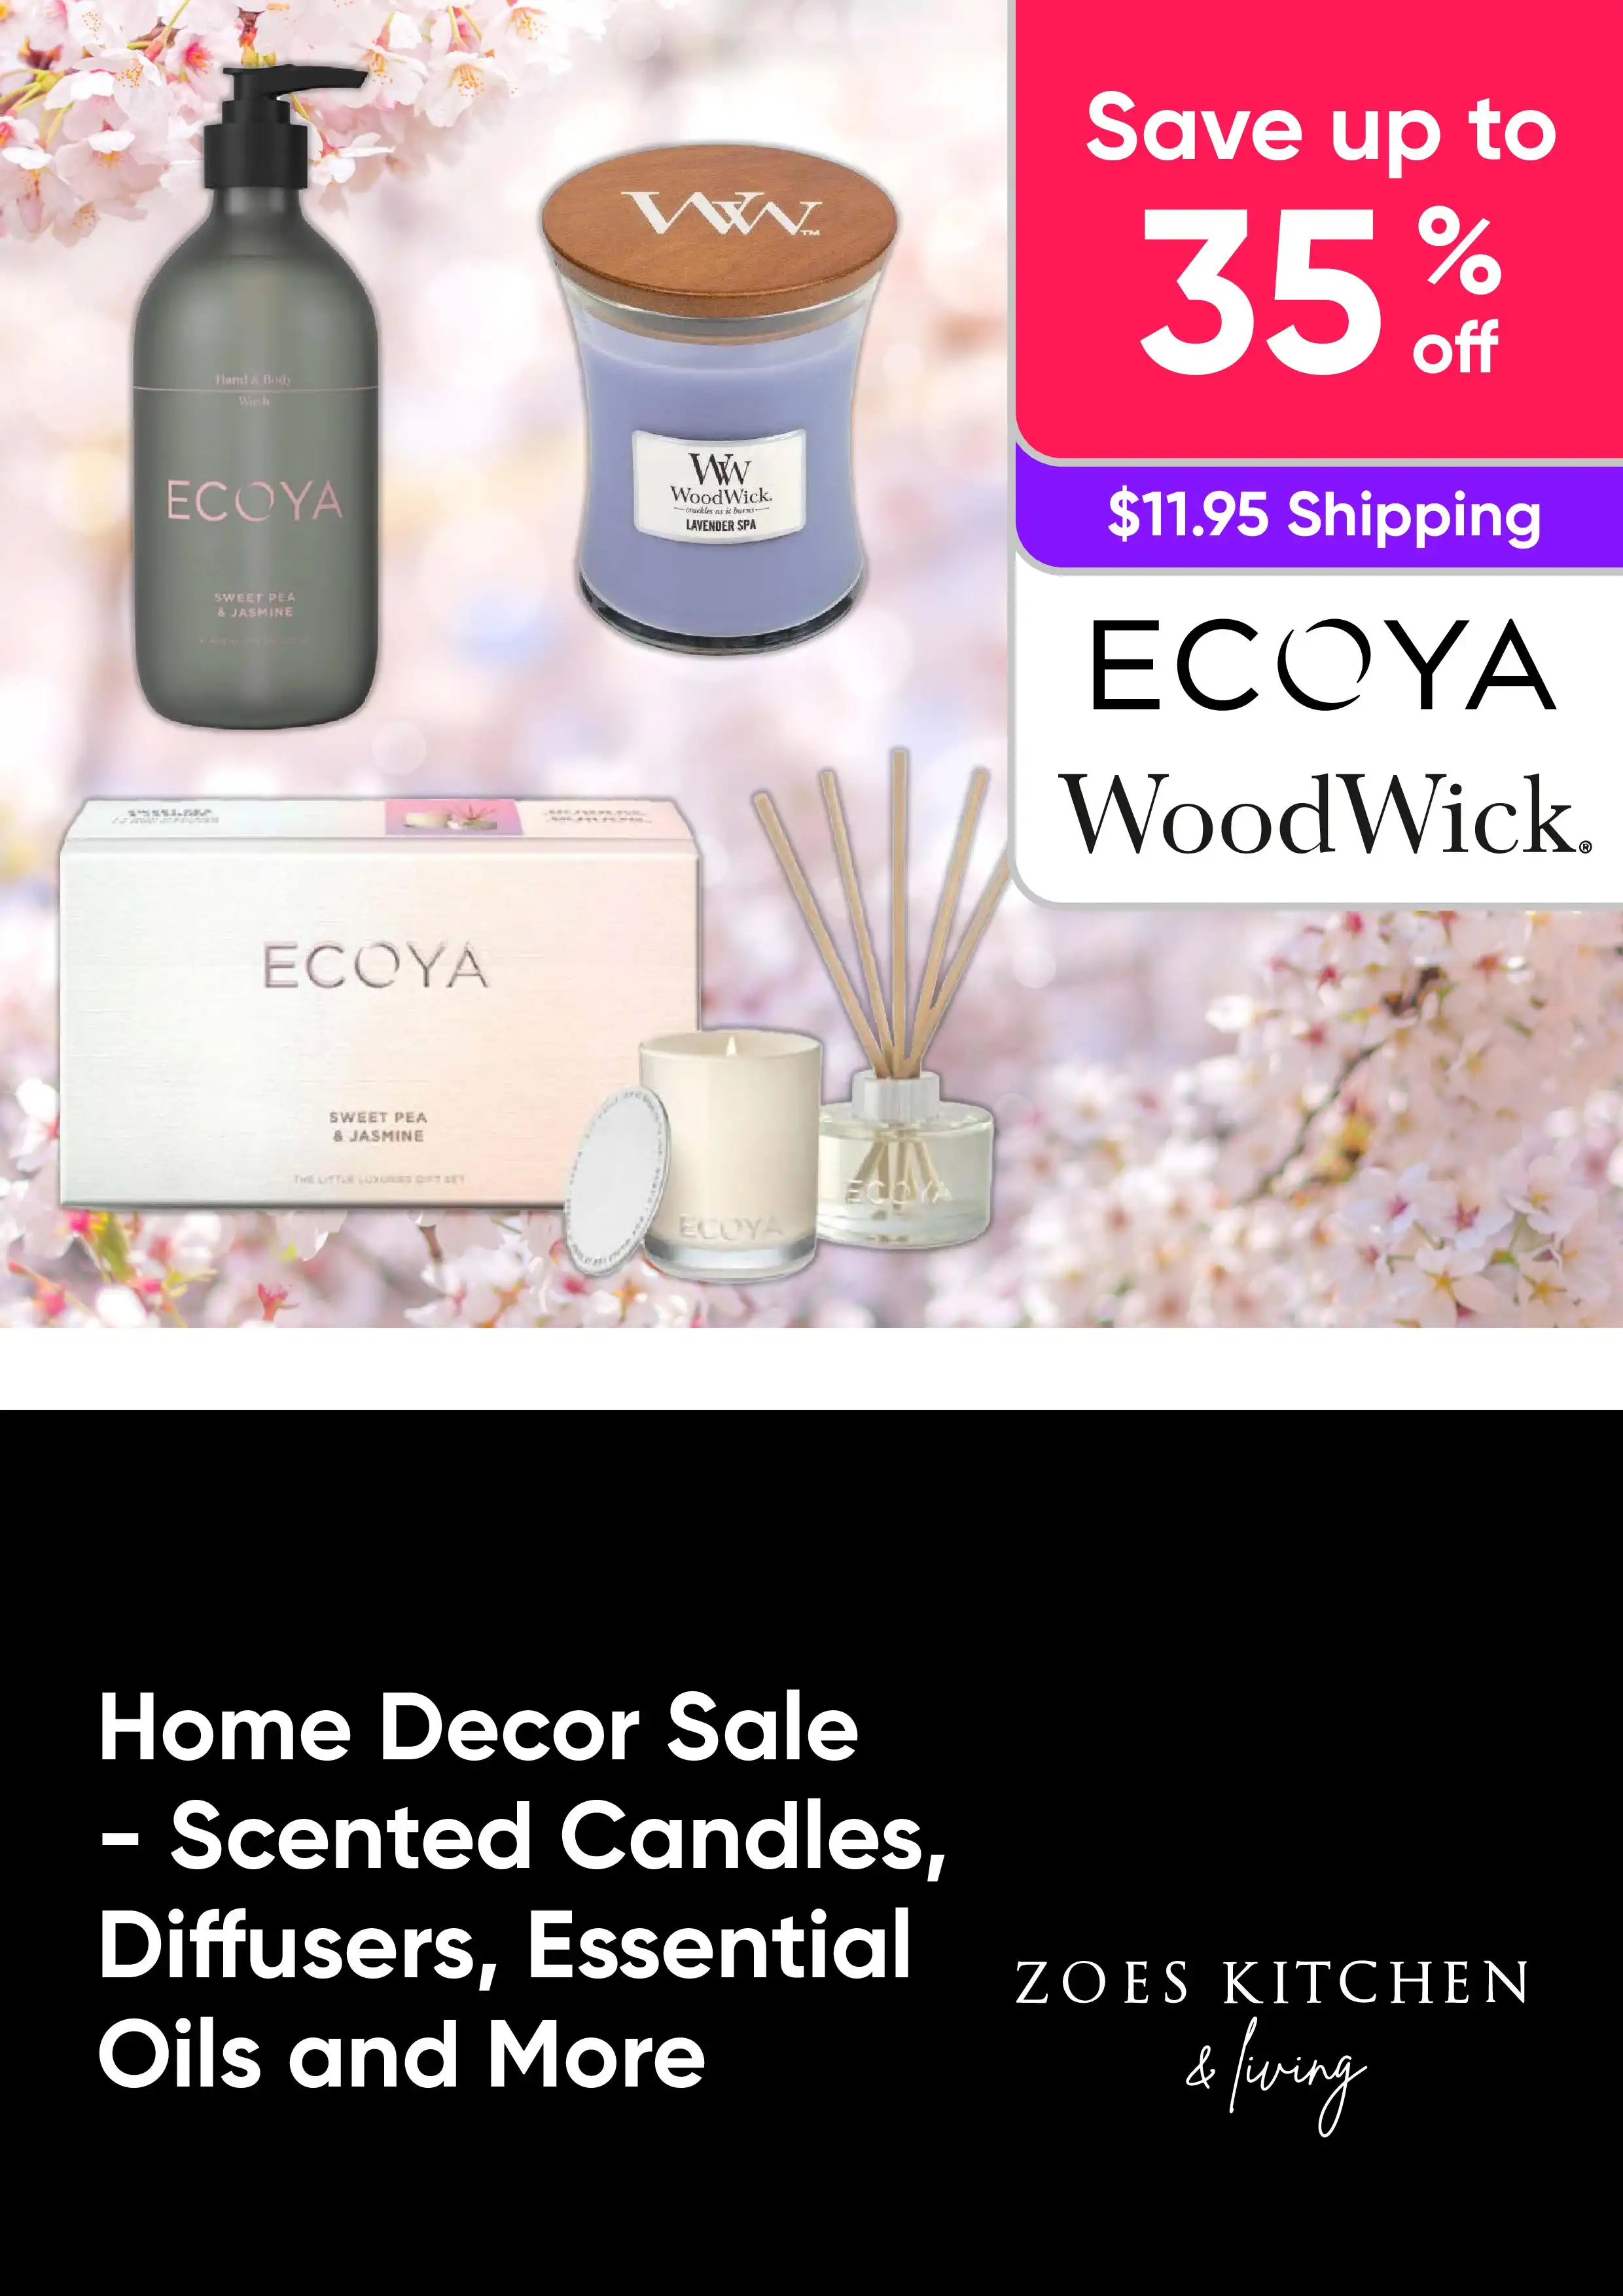 Home Decor Sale - Save Up to 35% Off Scented Candles, Diffusers, Essential Oils